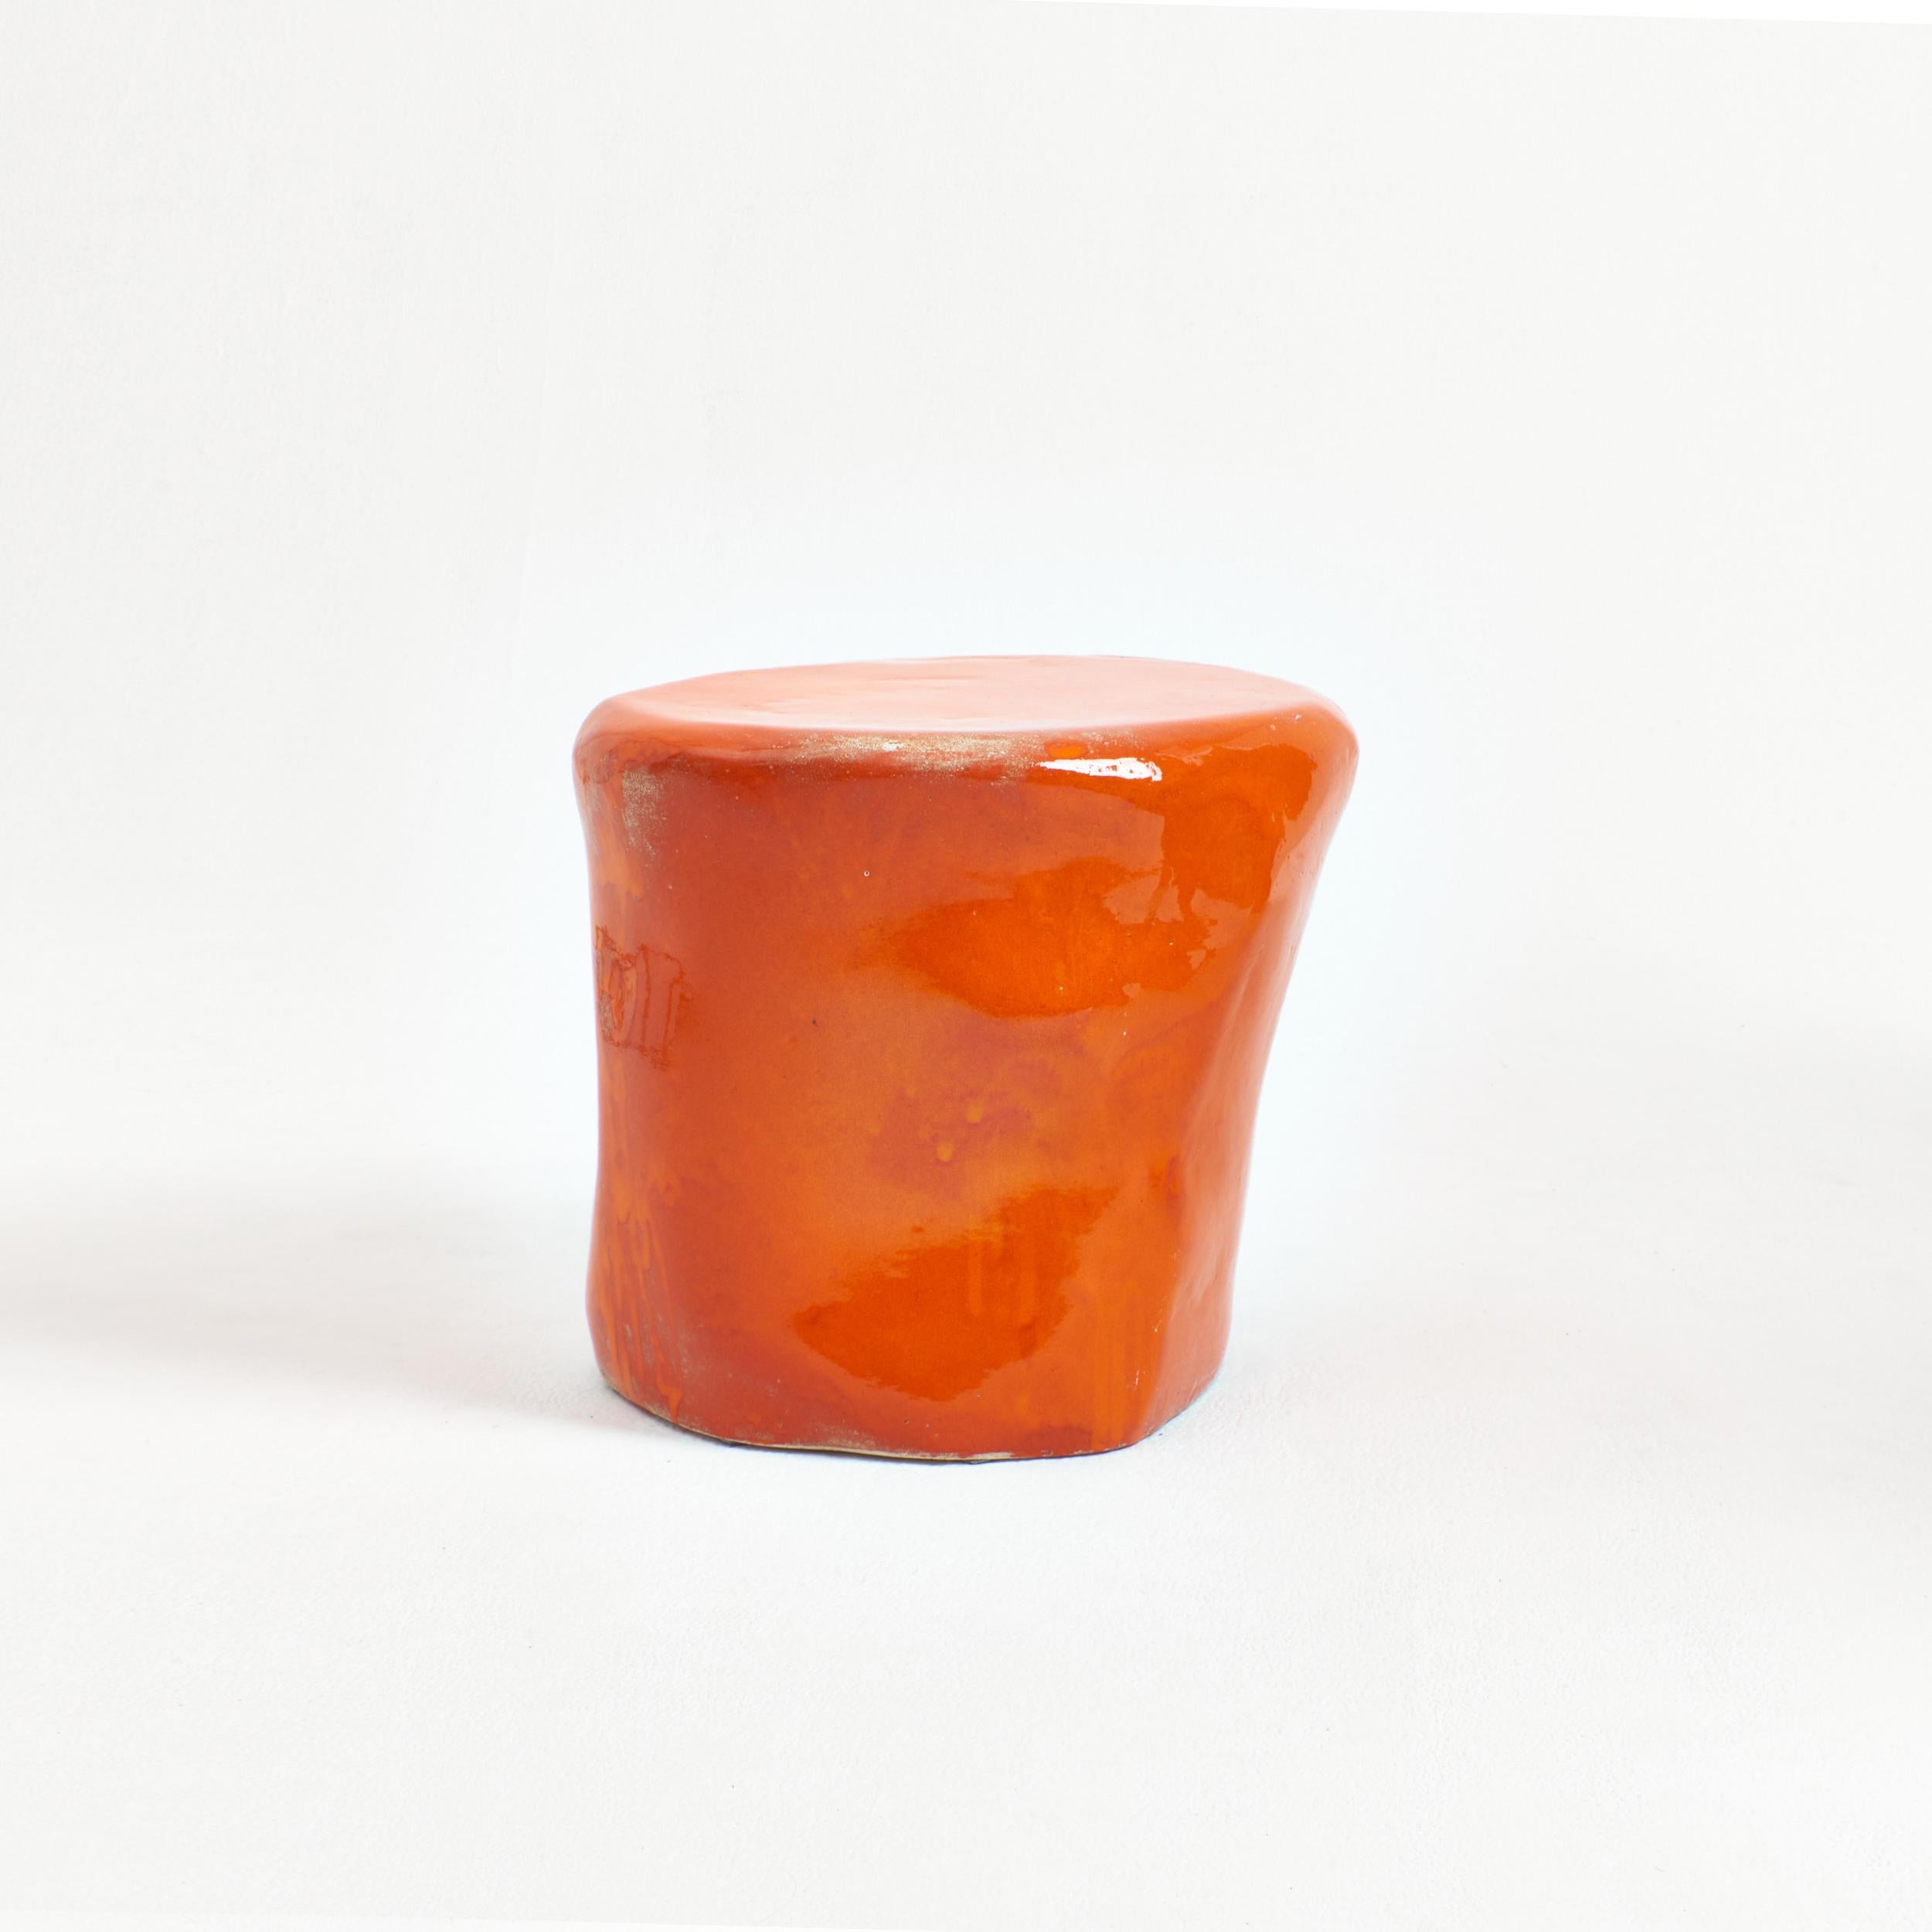 Ceramic Side Table Small
Designed by Project 213A in 2023

Hand-sculpted ceramic side table with an organic shape made in Project 213A's in-house ceramic workshop. Finished in a contemporary orange glaze.
Each piece is unique due to its handmade